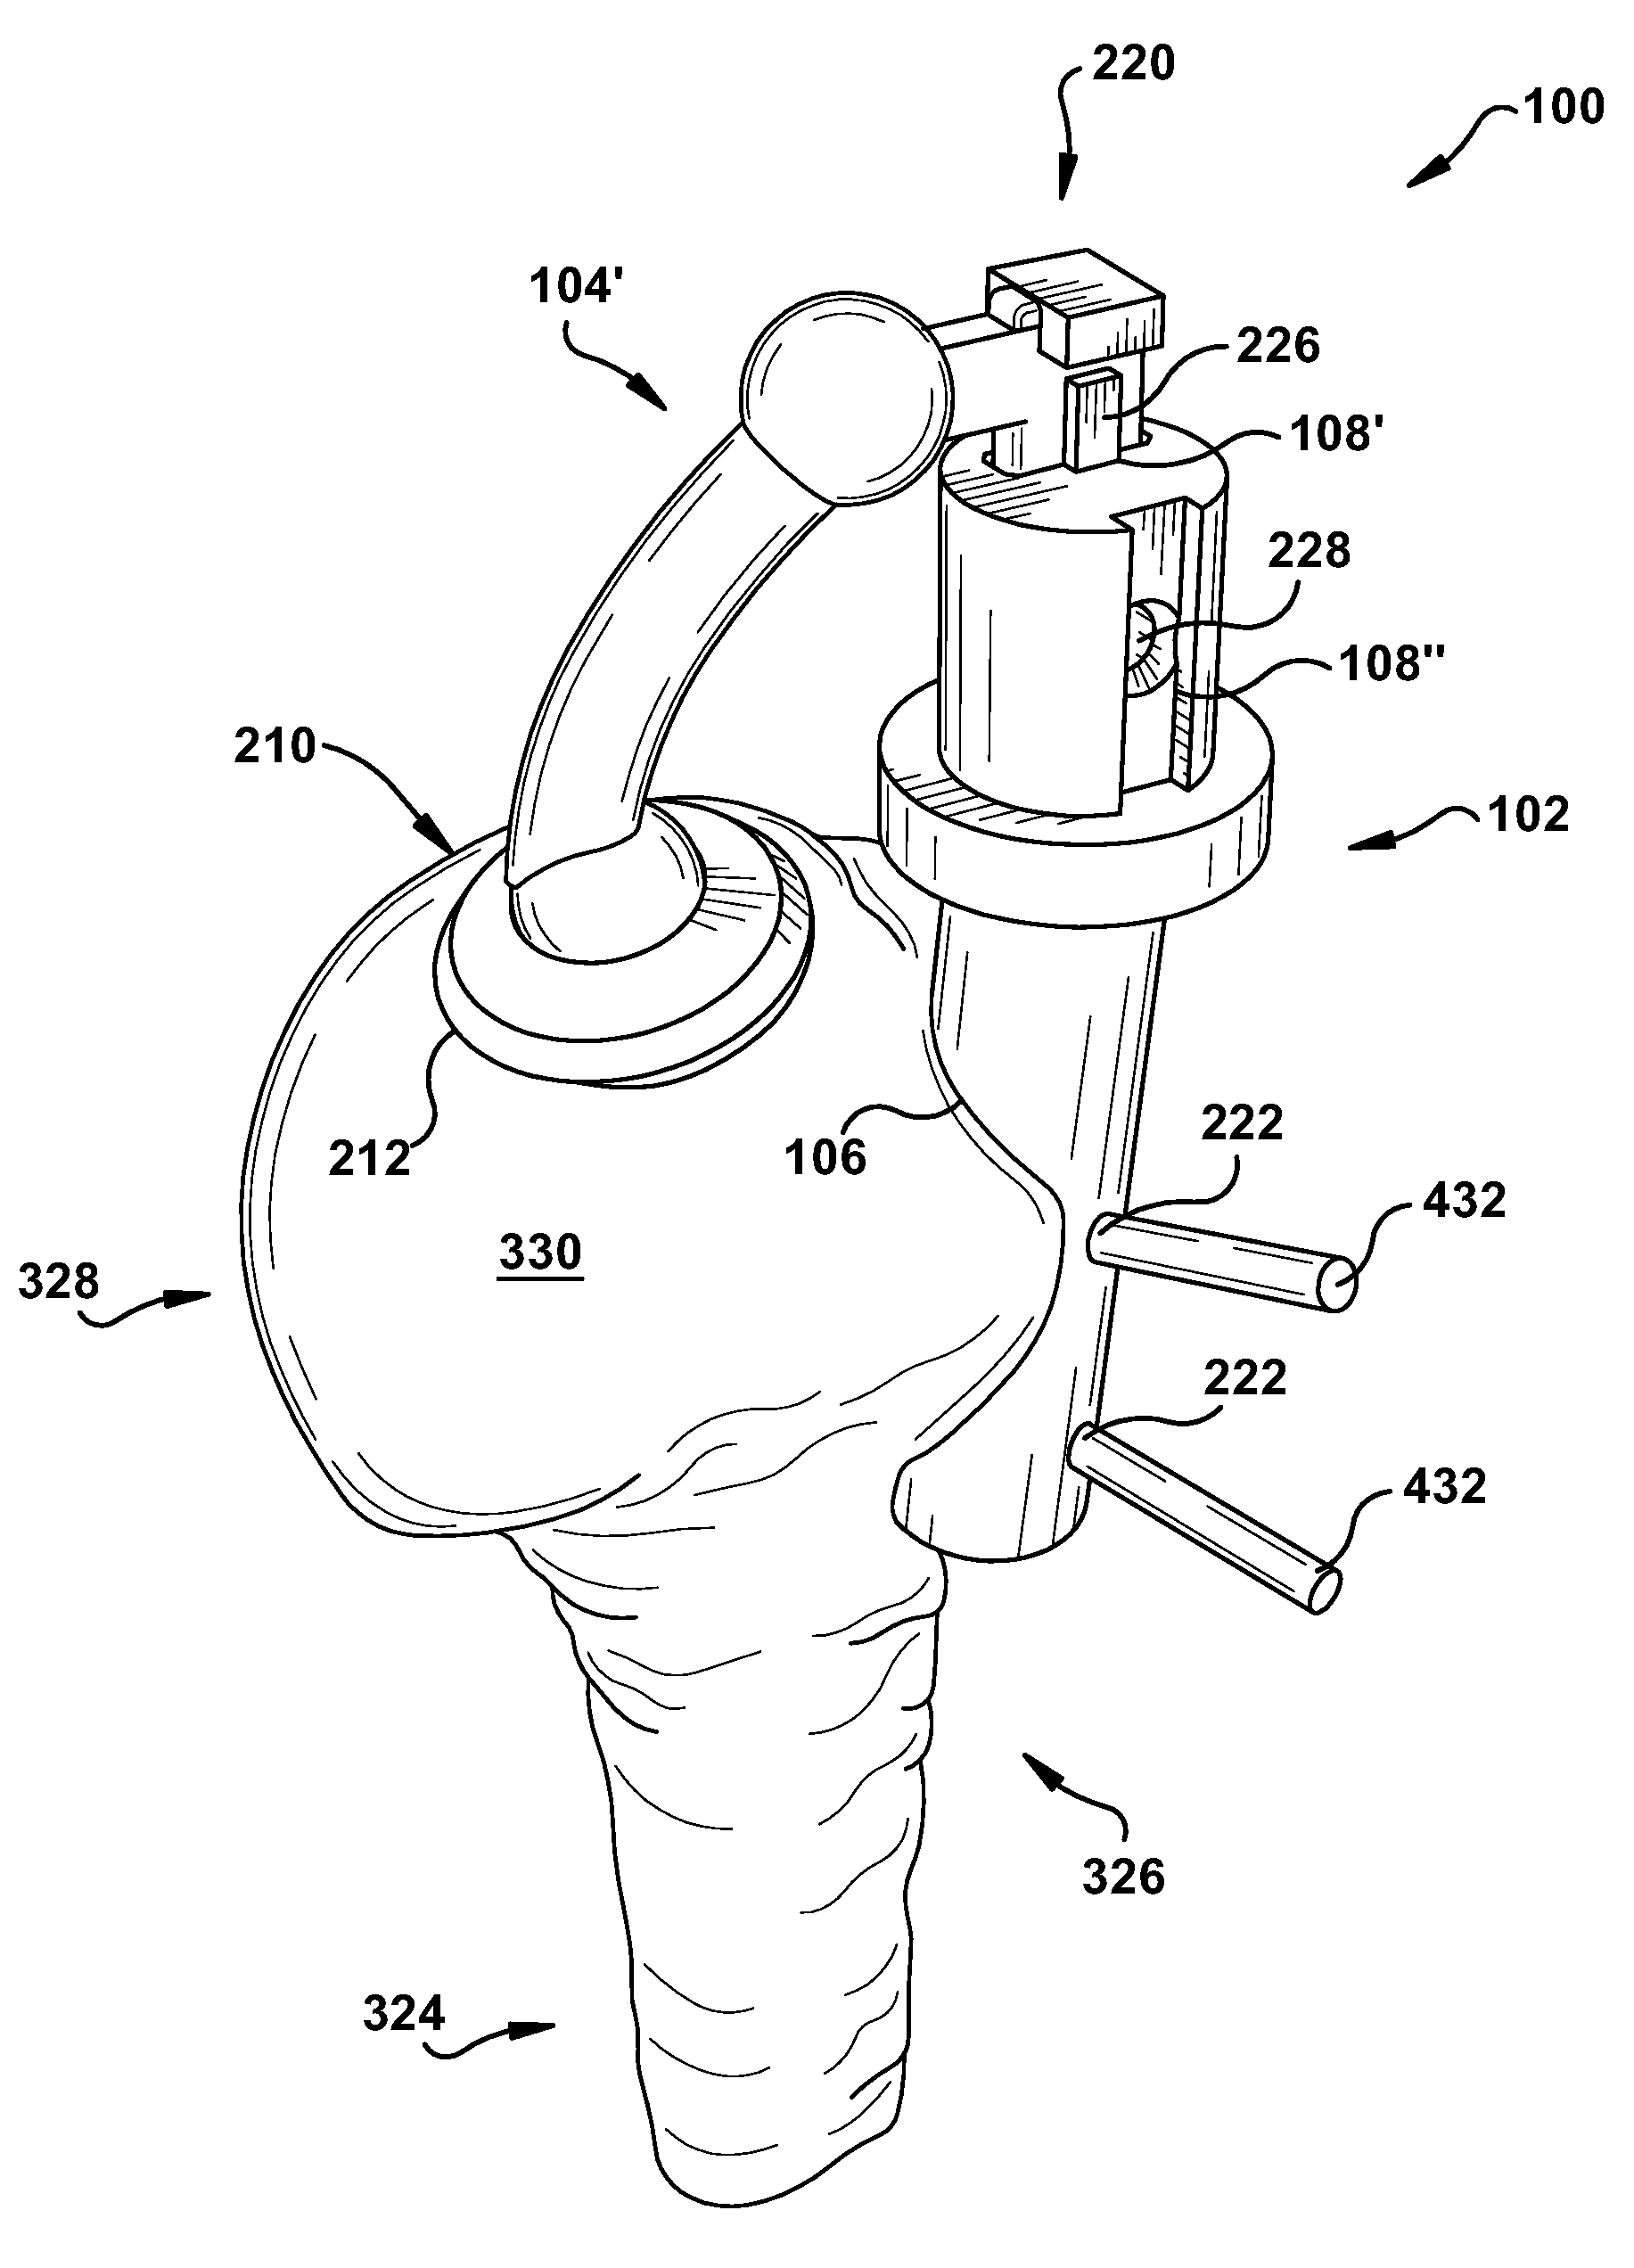 Apparatus and method for providing a reference indication to a patient tissue